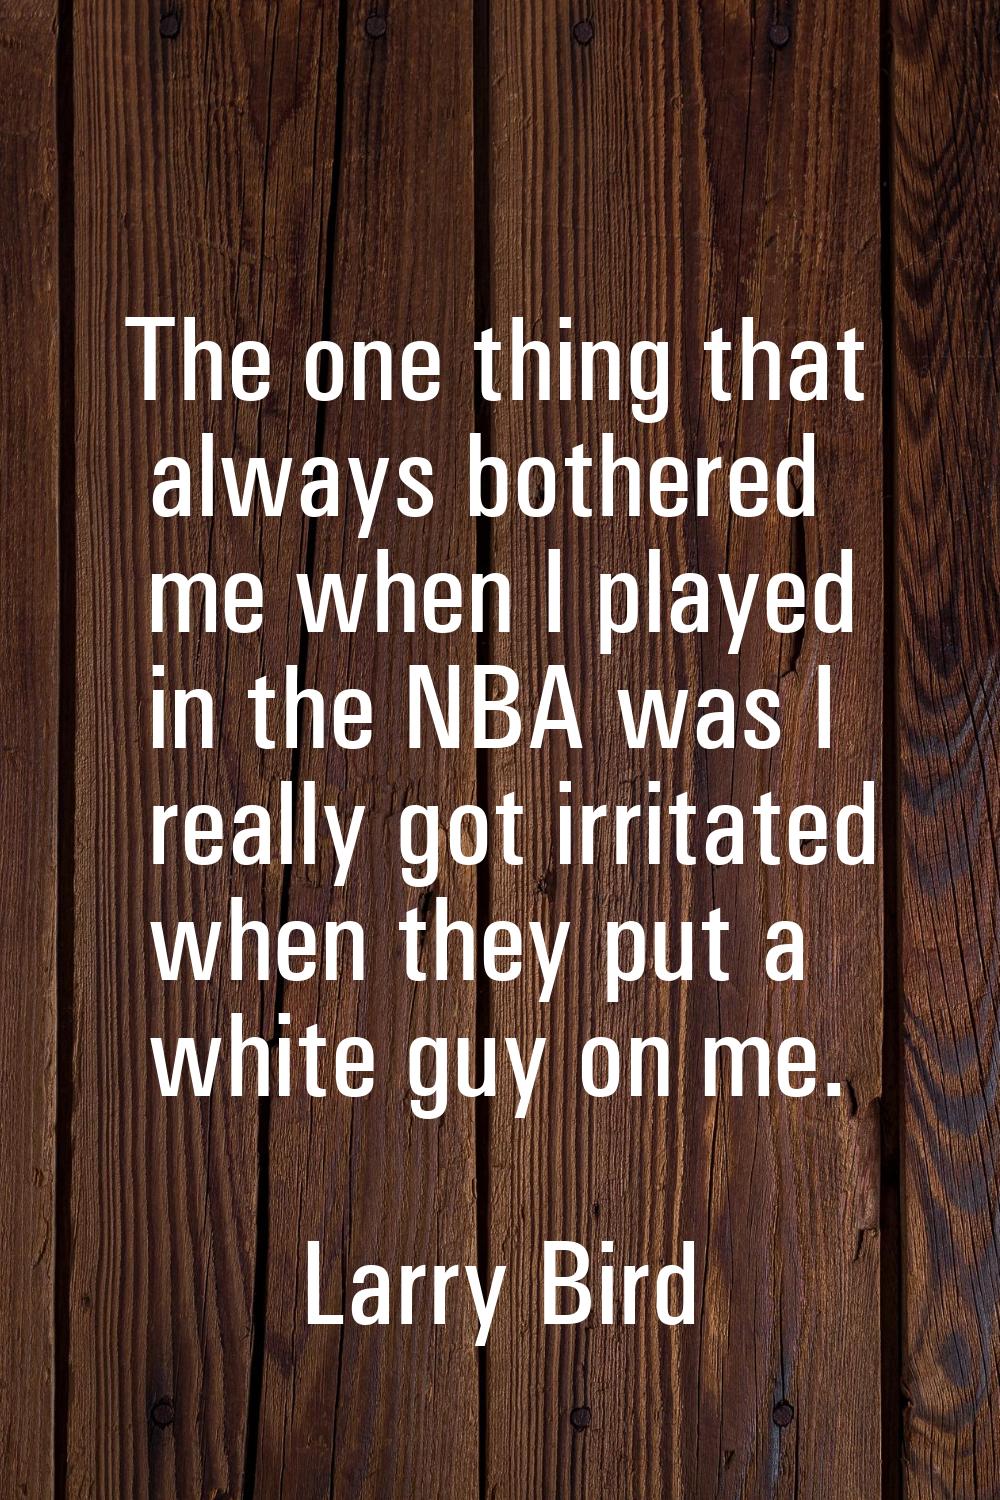 The one thing that always bothered me when I played in the NBA was I really got irritated when they